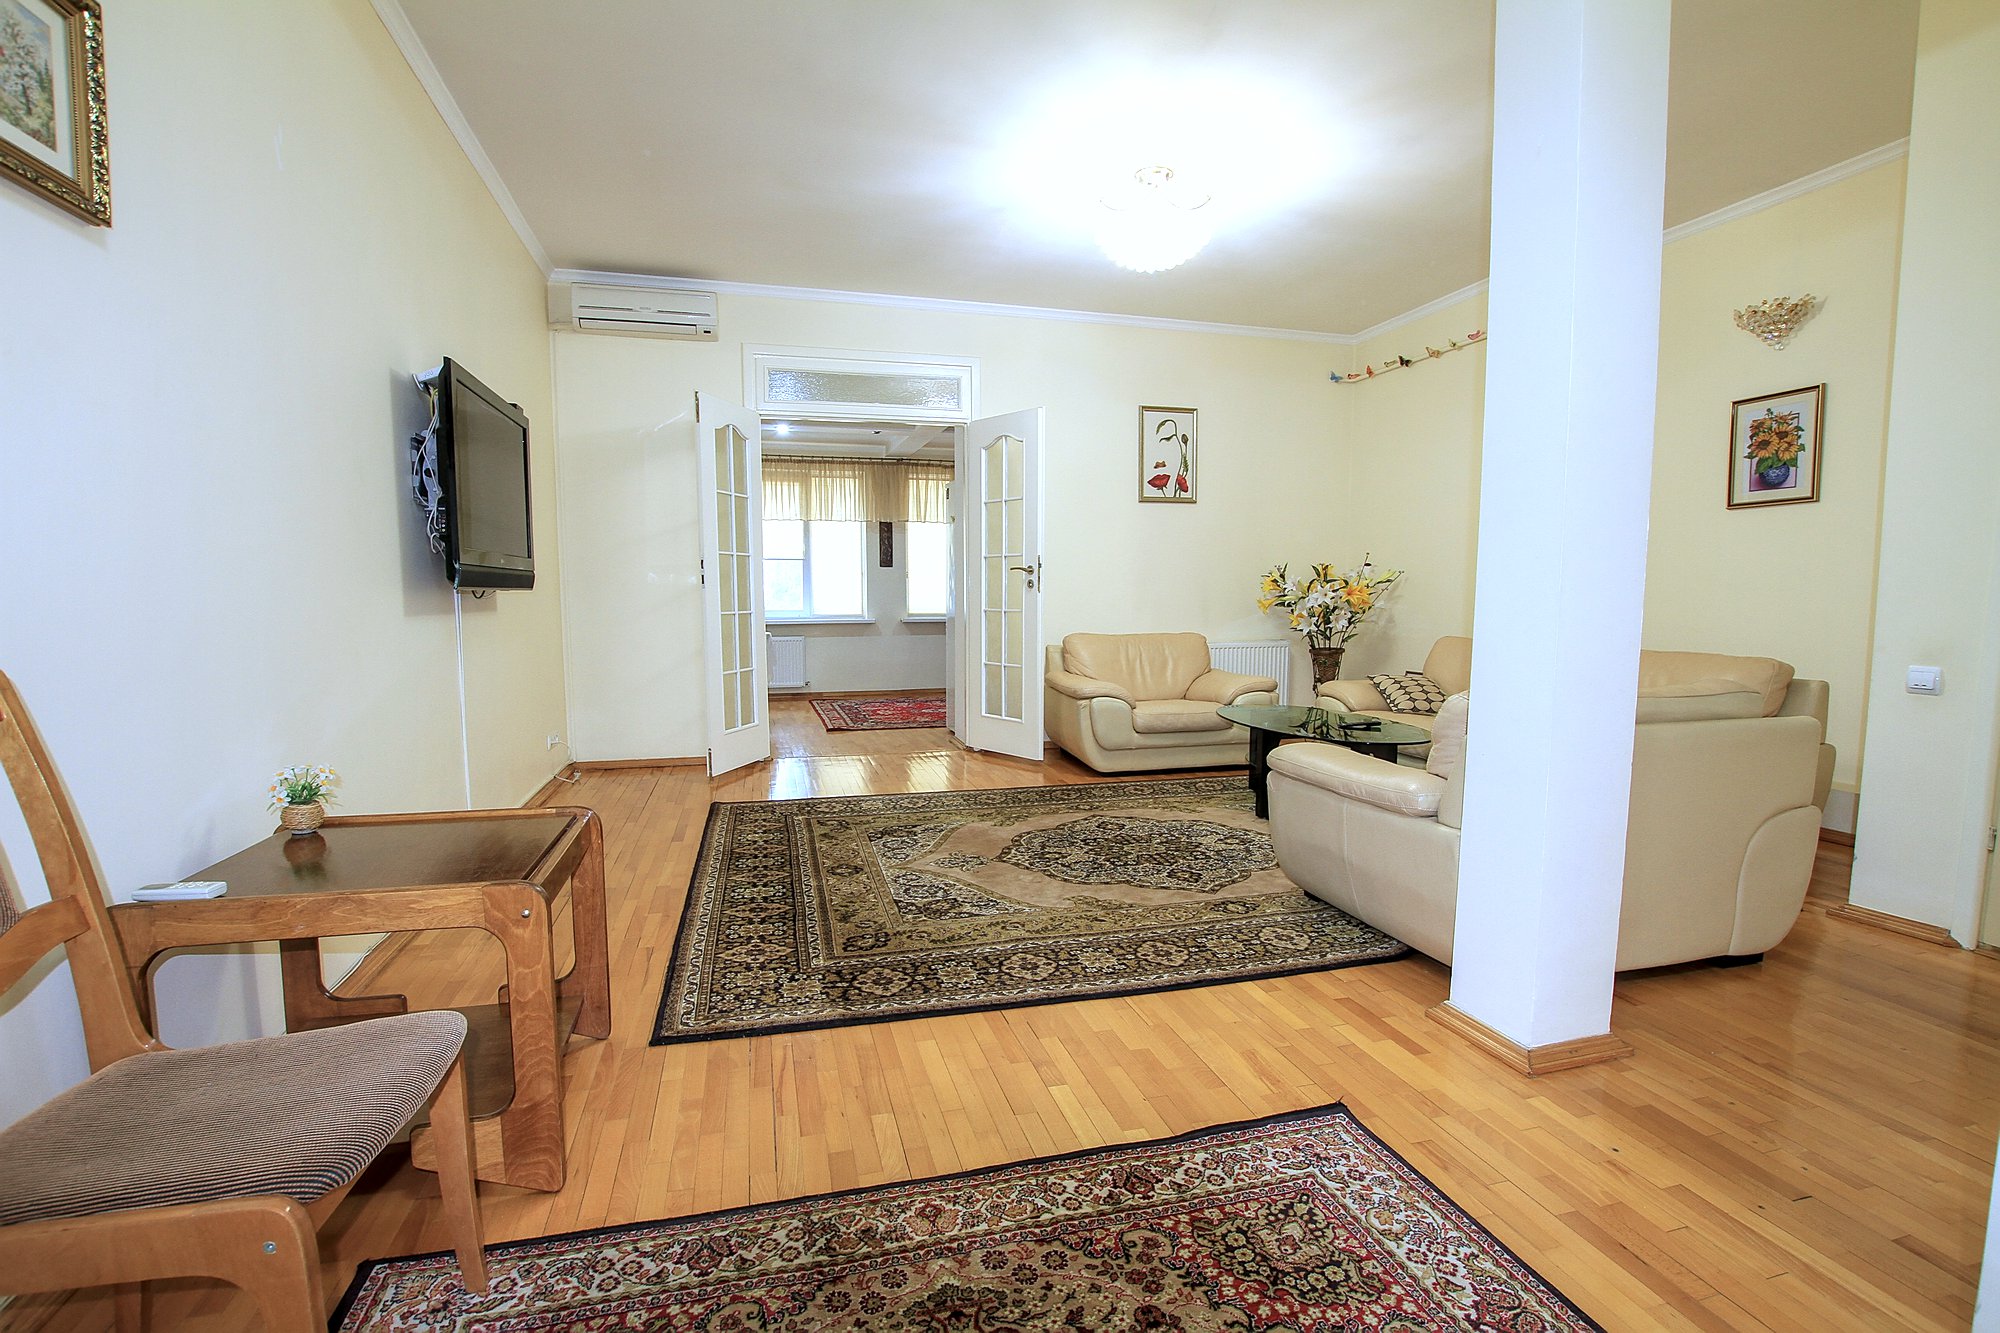 Downtown Lease is a 3 rooms apartment for rent in Chisinau, Moldova